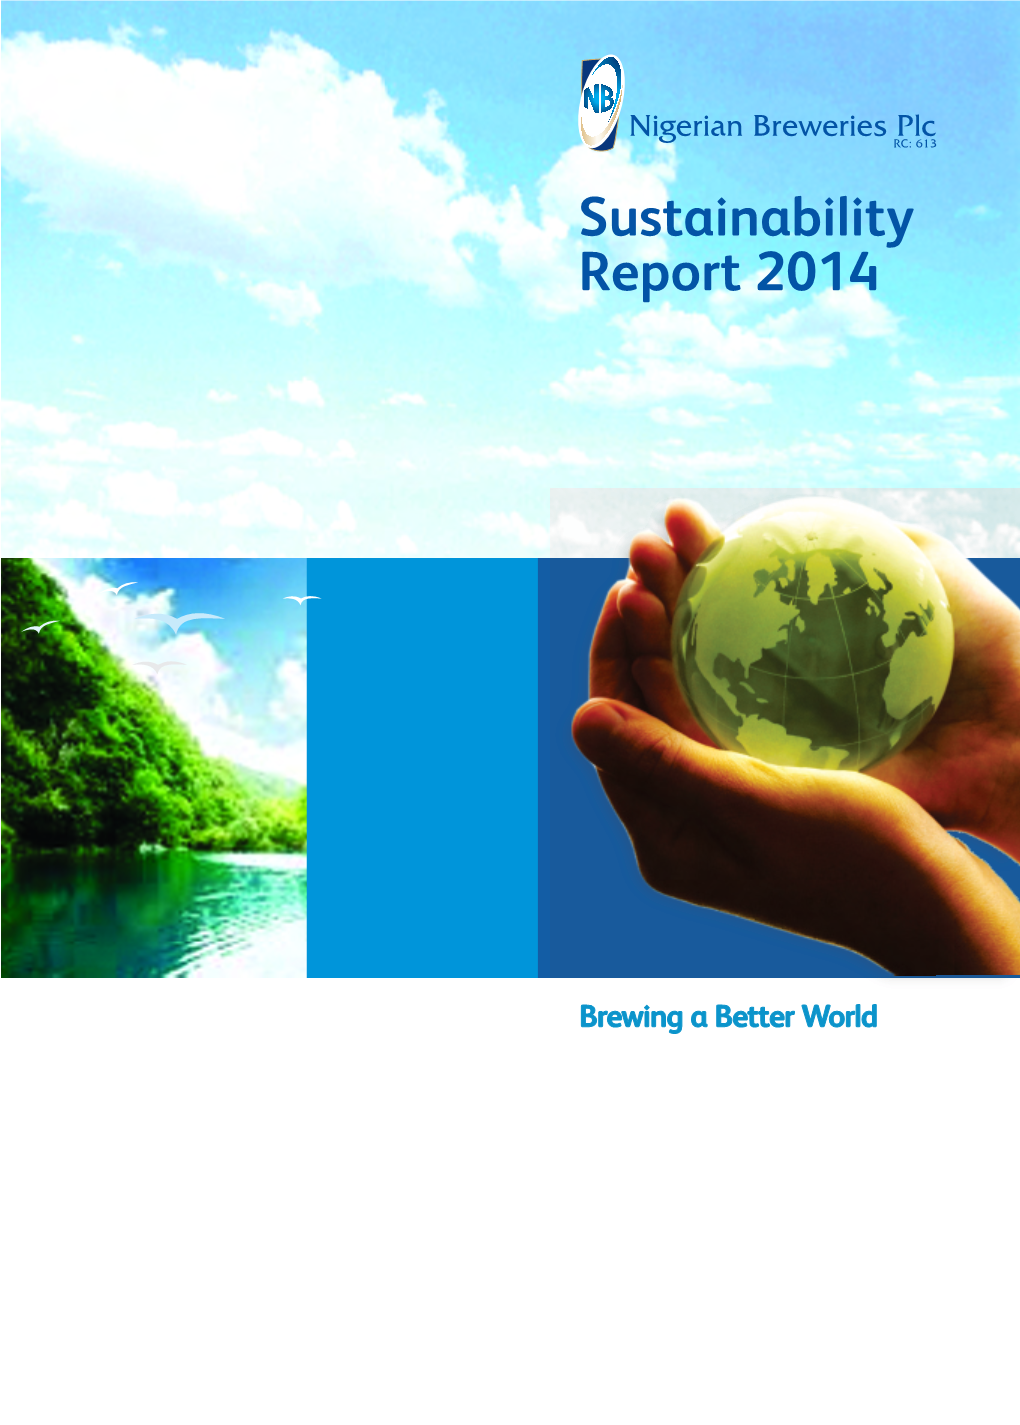 Our Sustainability Report 2014